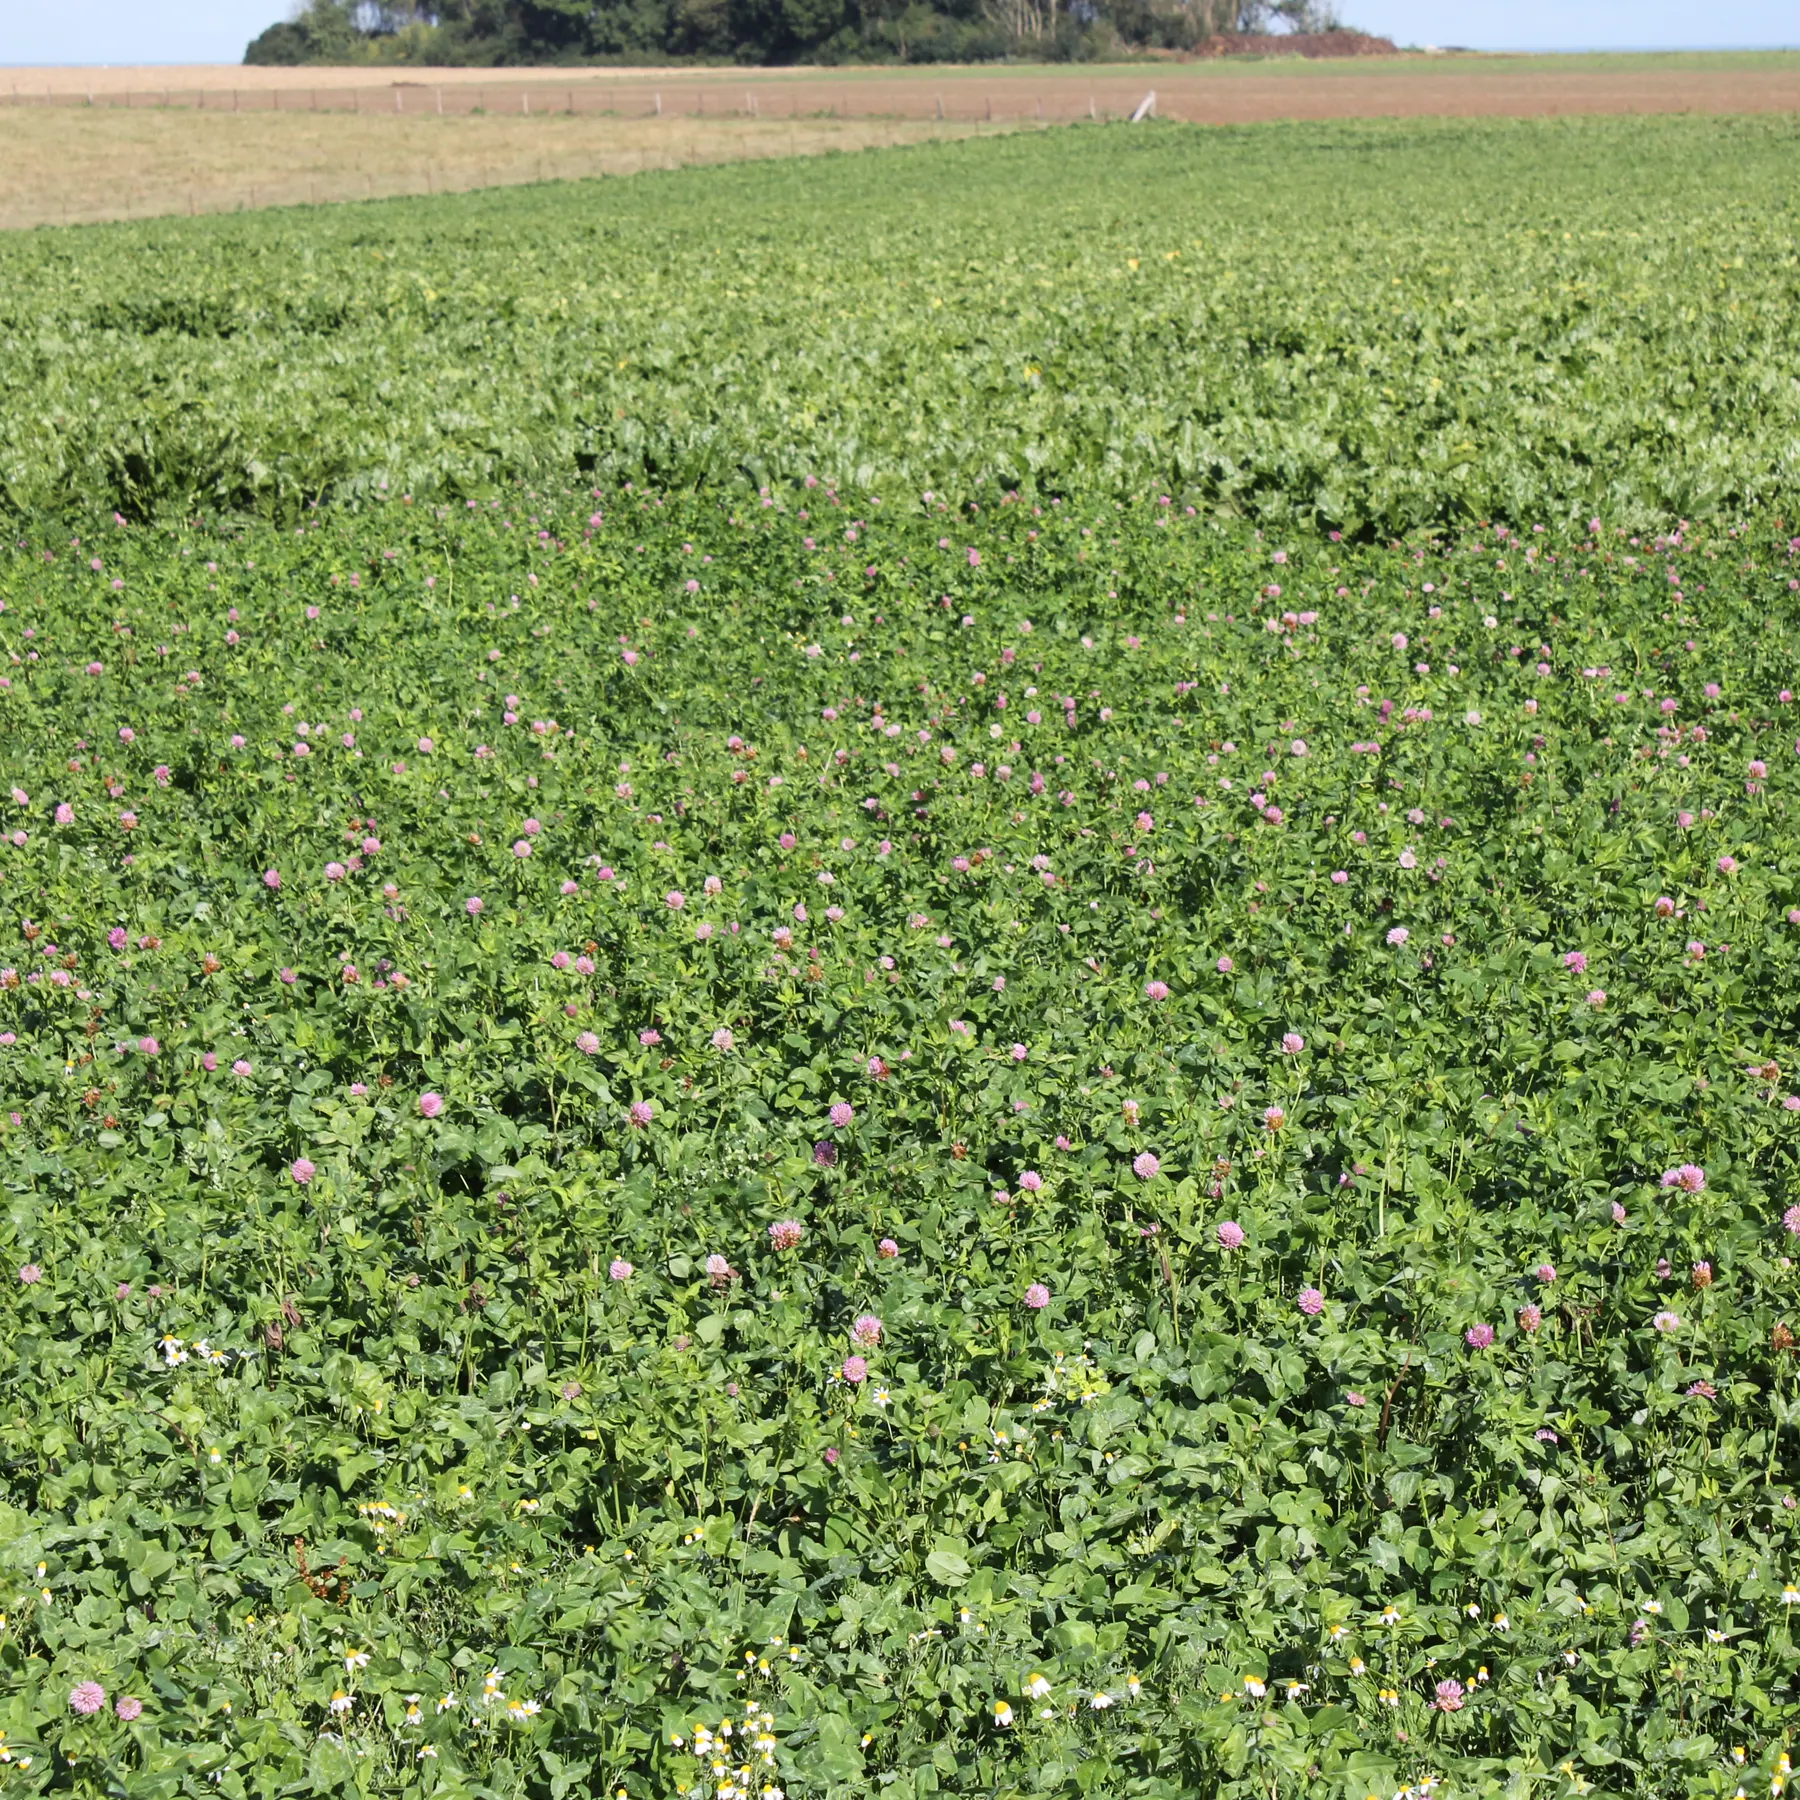 Red Clover in a field